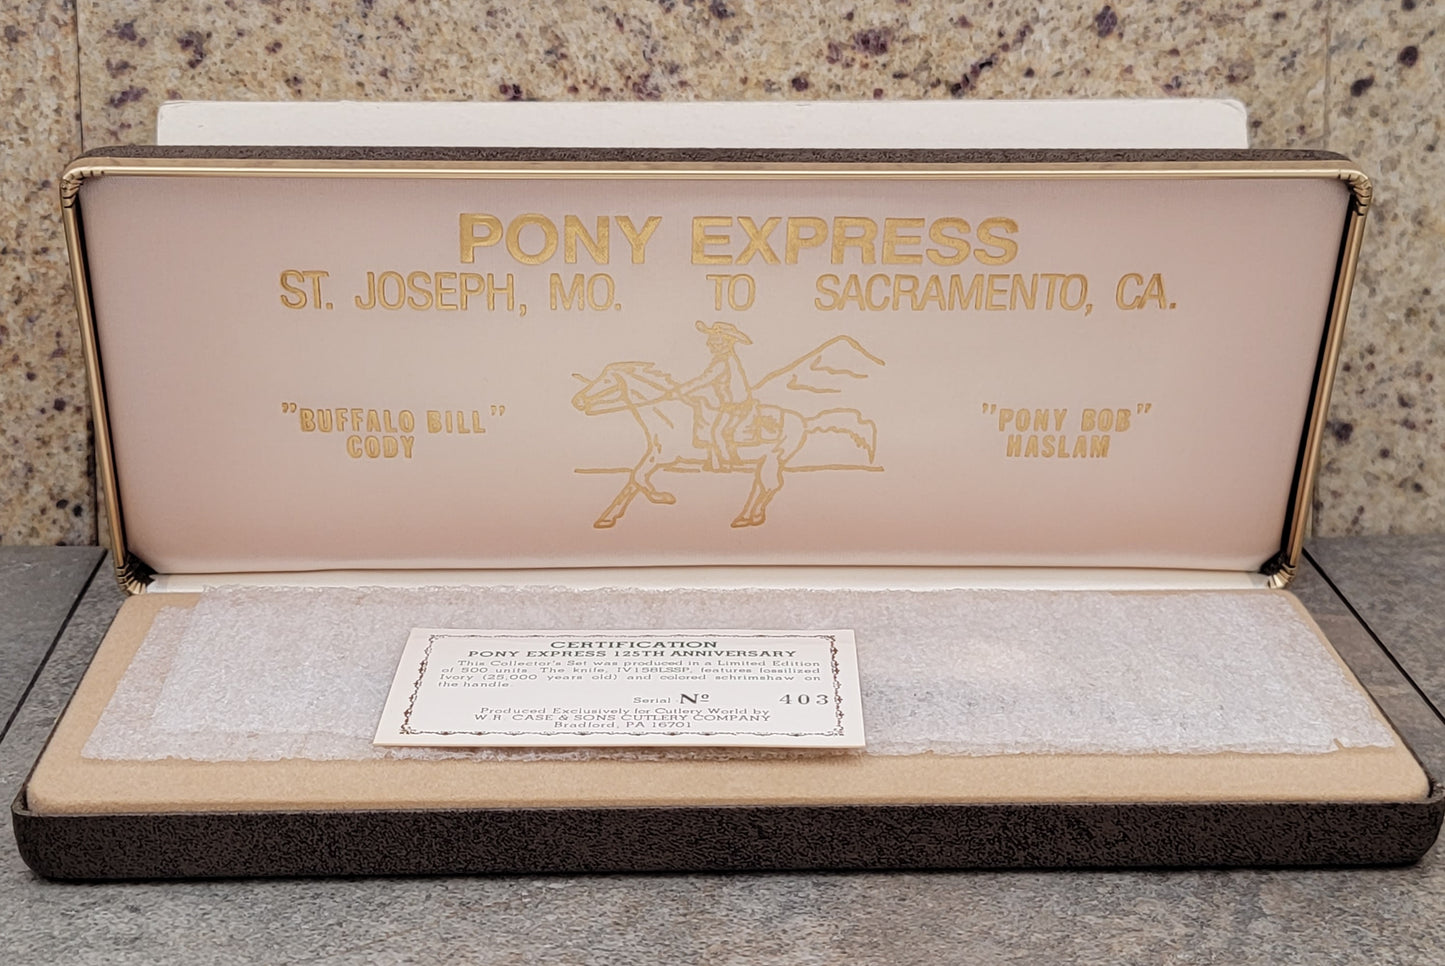 1985 Case 125th Anniversary Pony Express 25,000 YEAR OLD FOSSILIZED HANDLED SCRIMSHAWED Knife! SUPER RARE! Amazing!